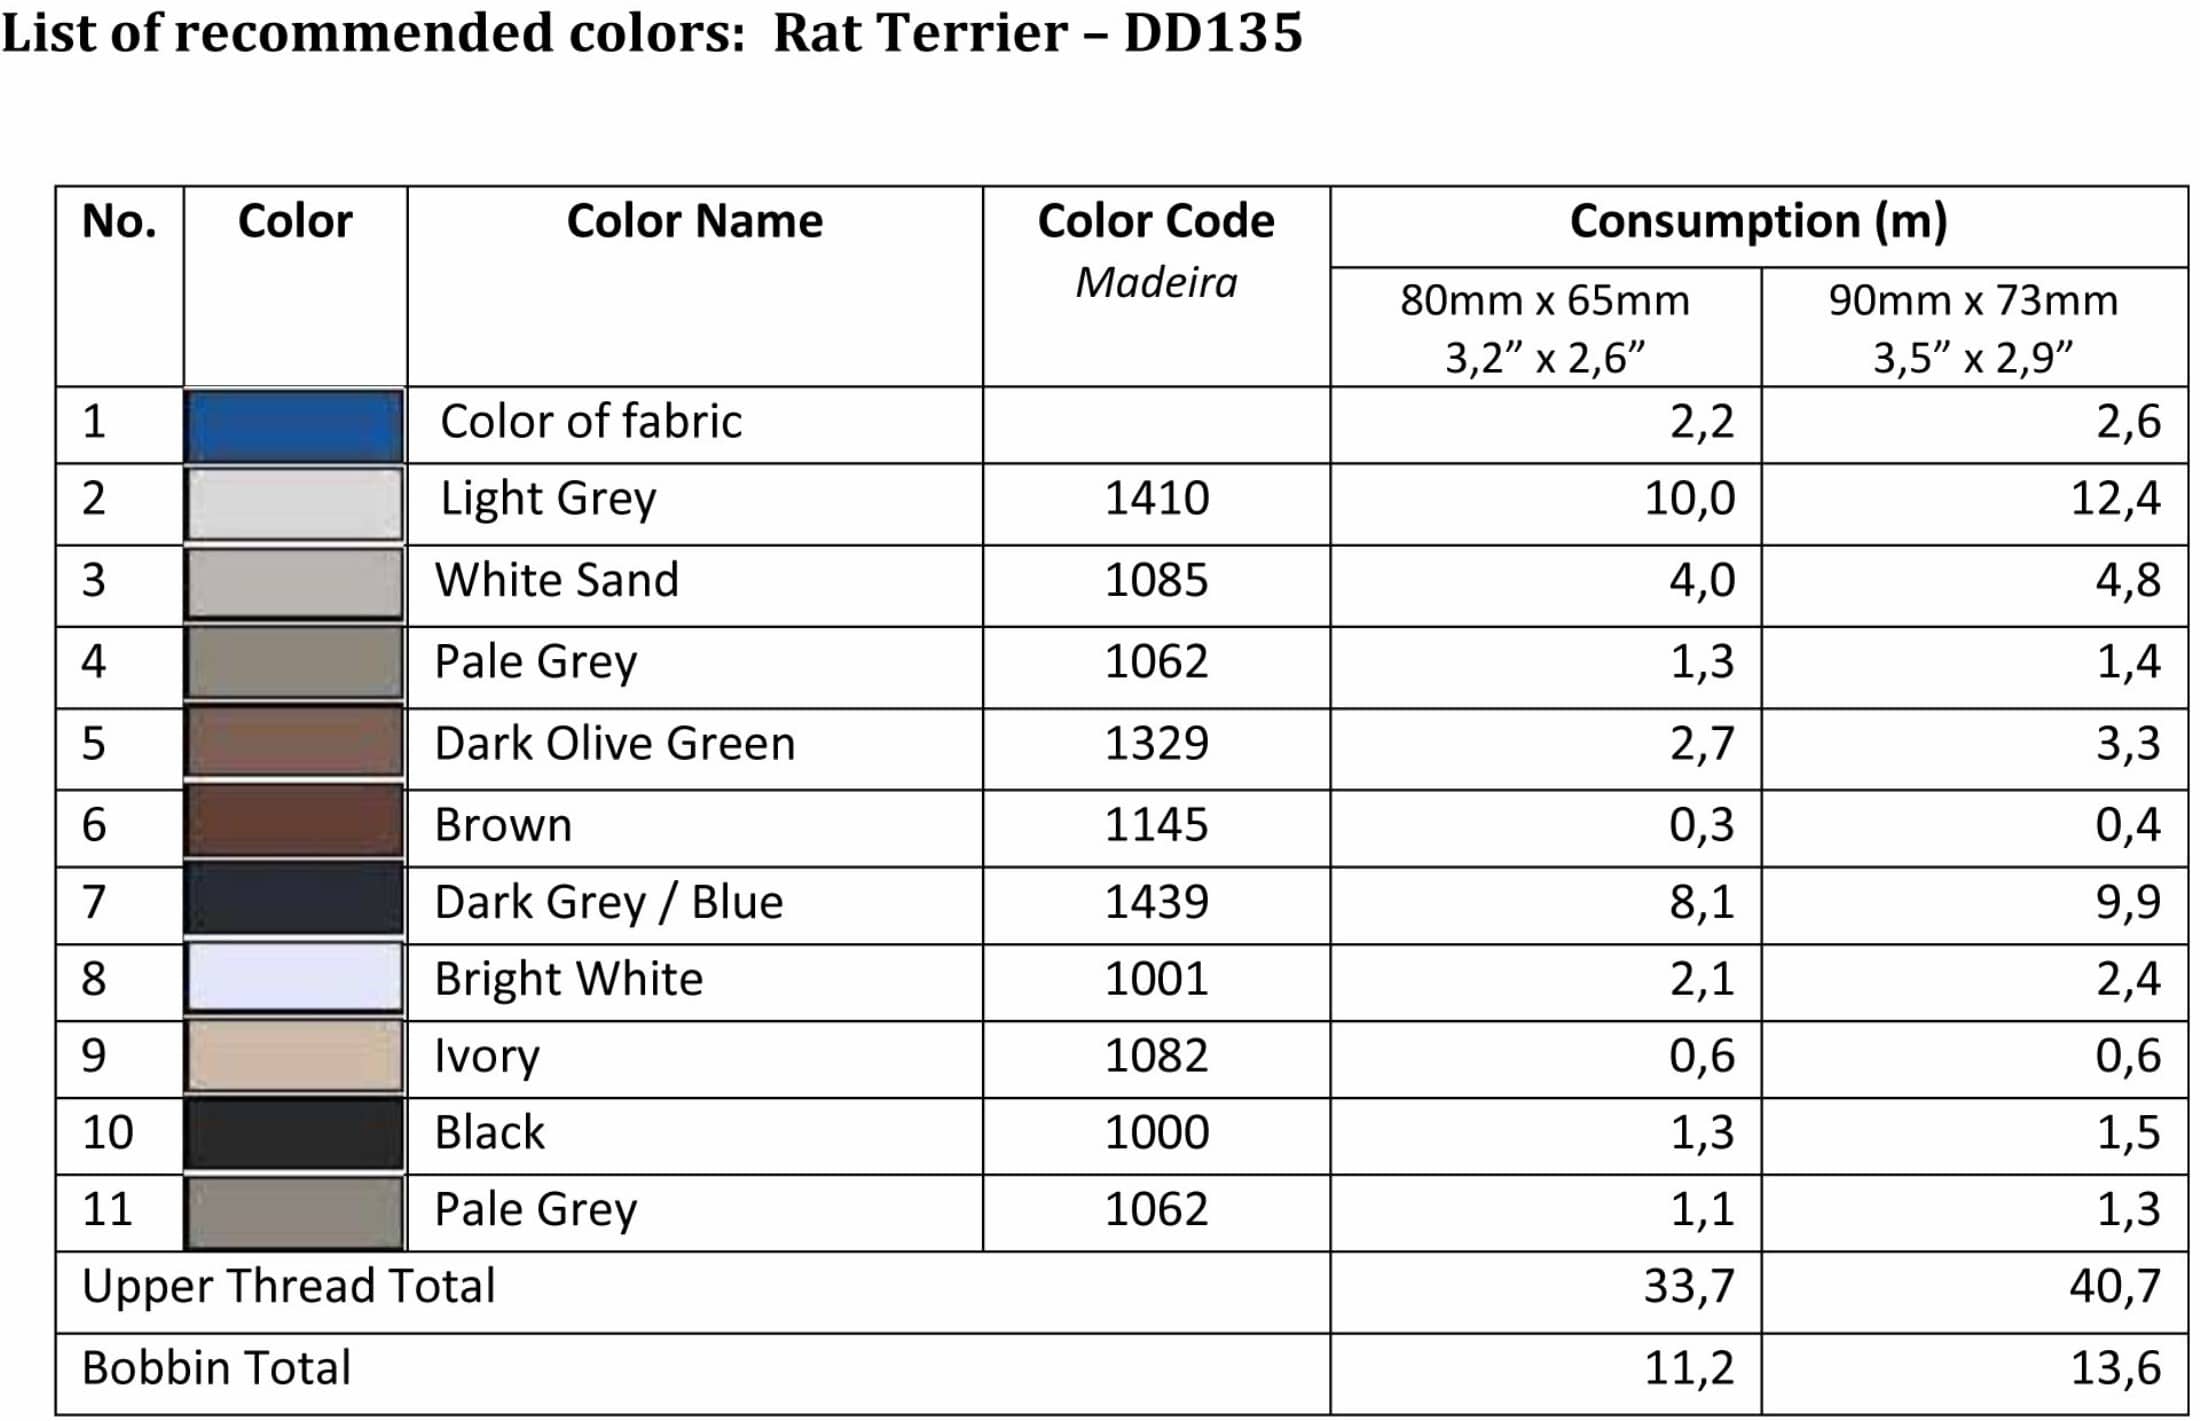 List of recommended colors - DD135